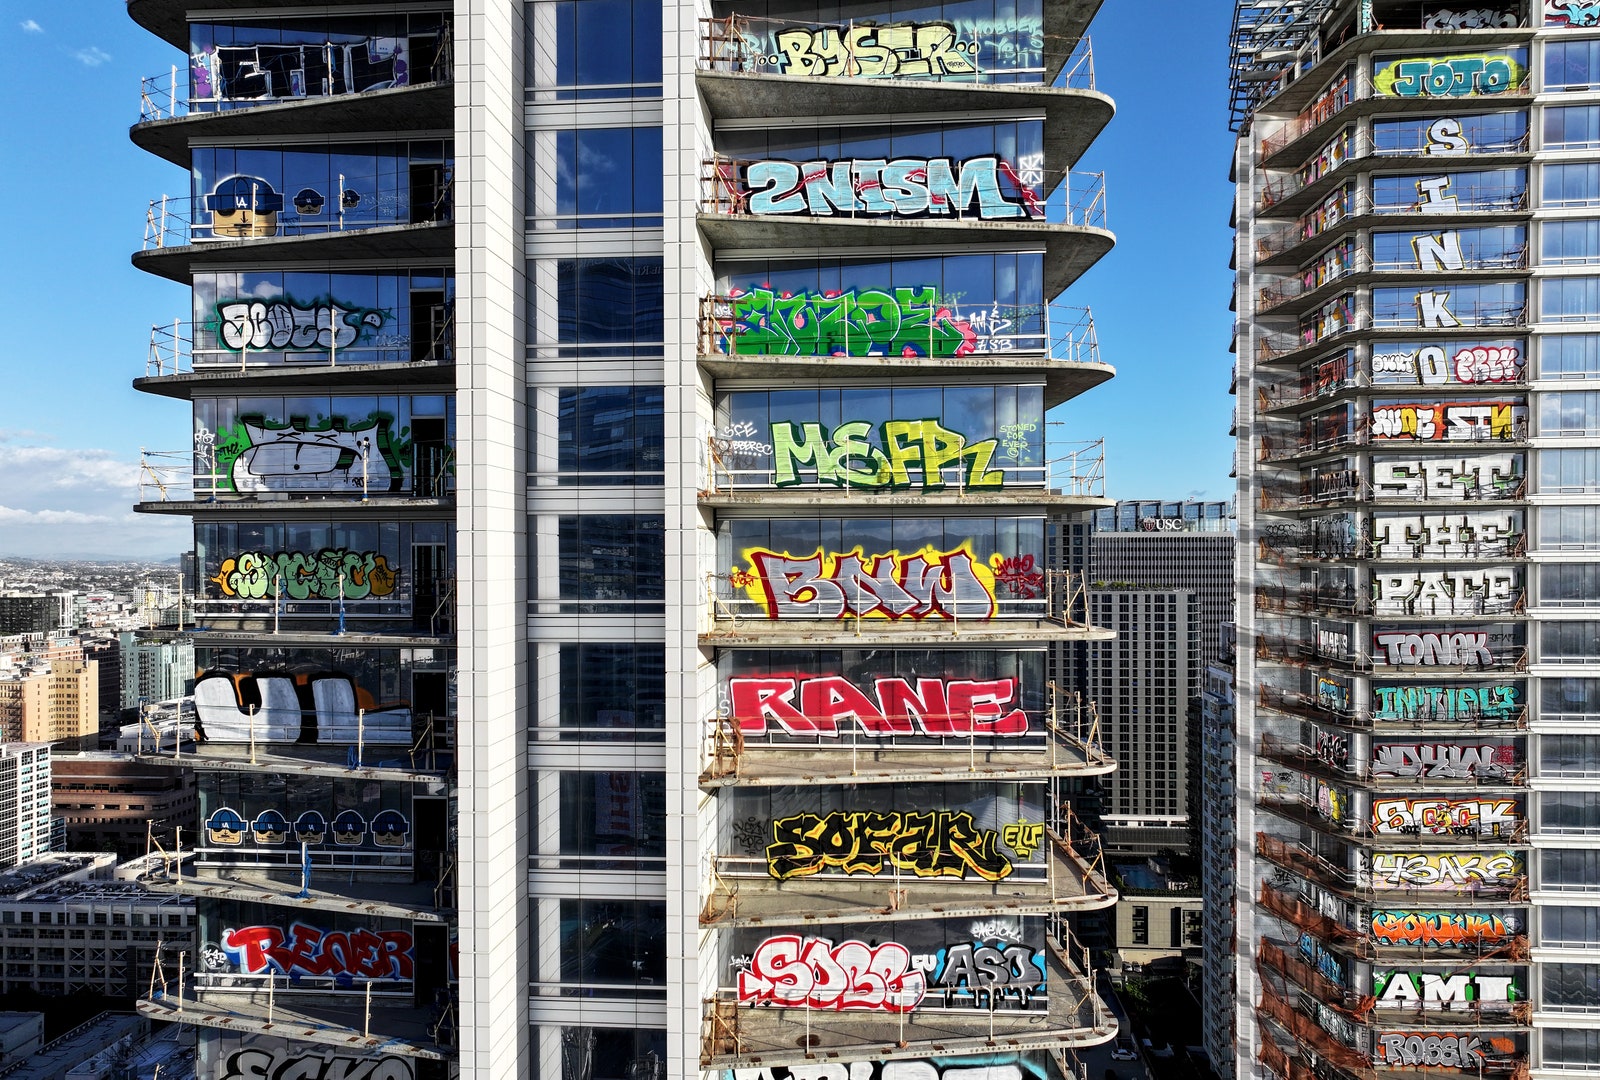 An aerial view of graffiti spray painted by taggers on at least 27 stories of an unfinished skyscraper development...